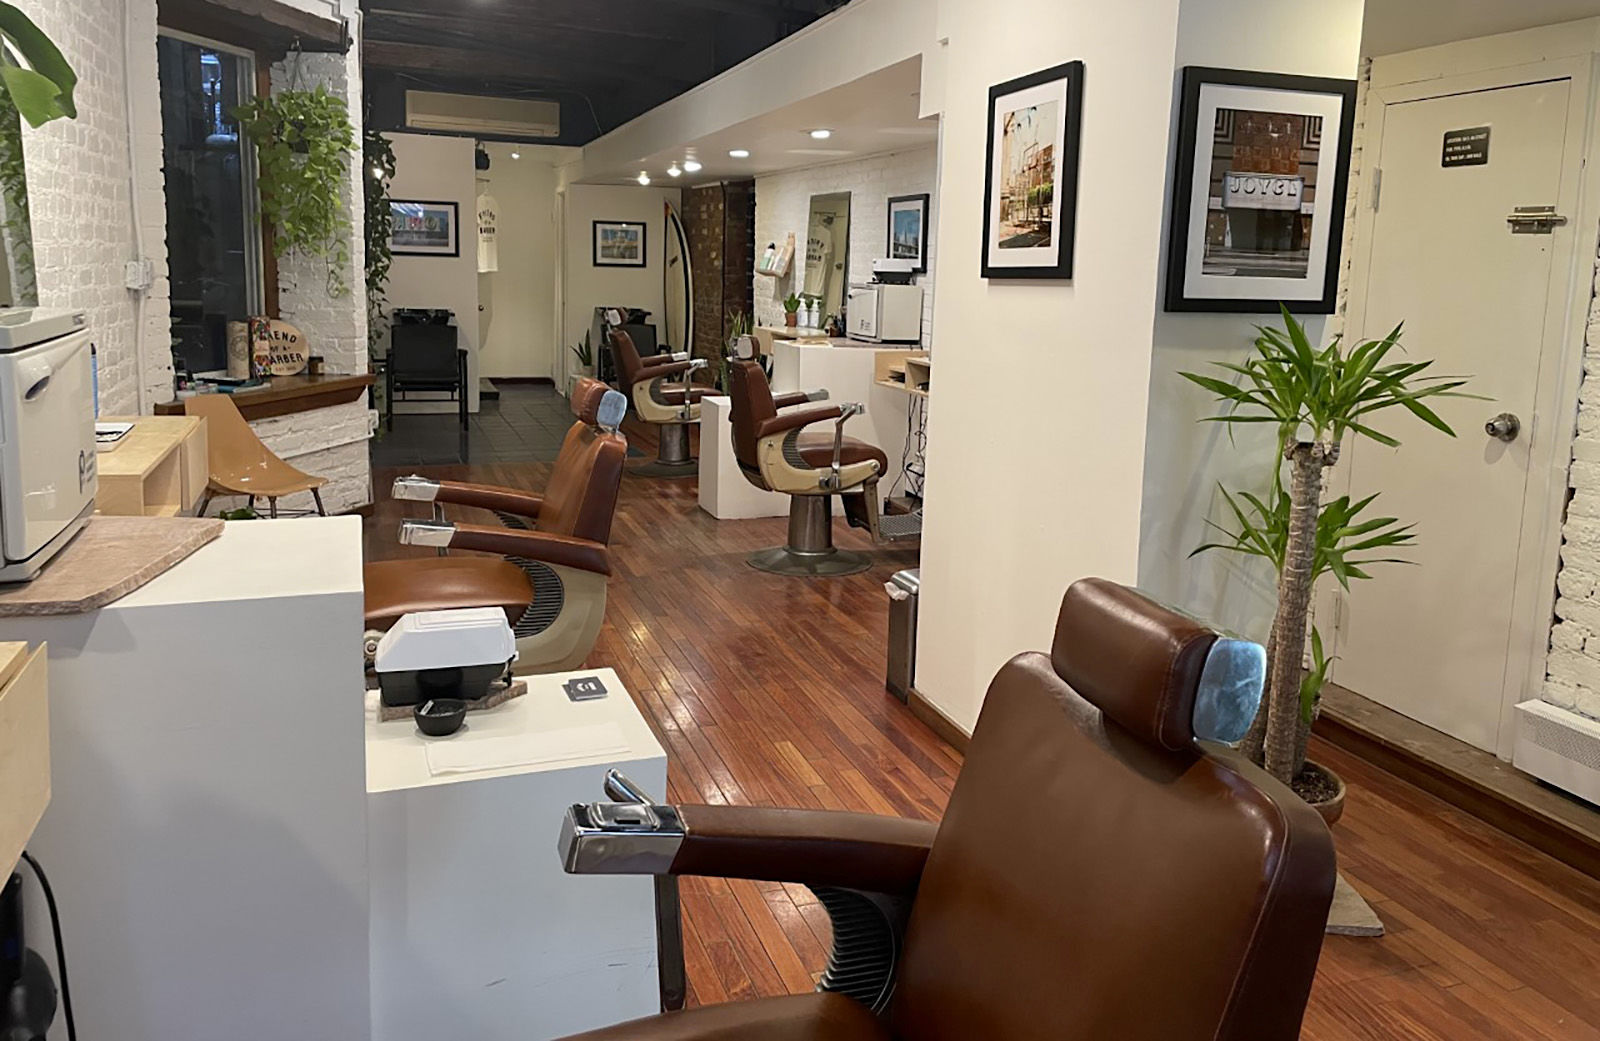 Photograph of the interior of the barbershop showcasing brown leather chairs, plants, and white brick walls.